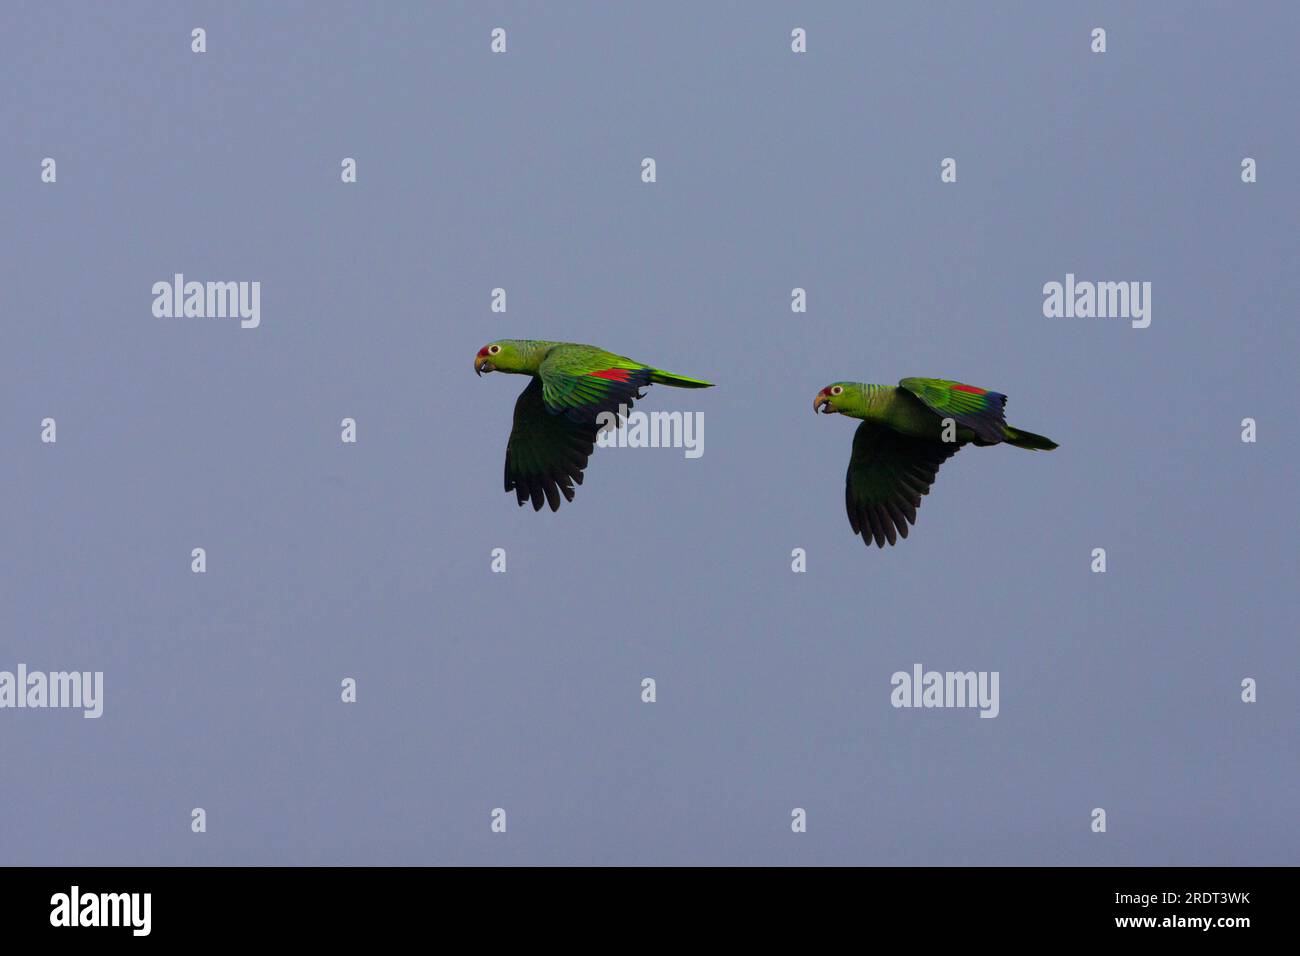 A pair of Red-lored Parrots, Amazona autumnalis, in flight over the rainforest of Soberania national park, Colon province, Republic of Panama. Stock Photo